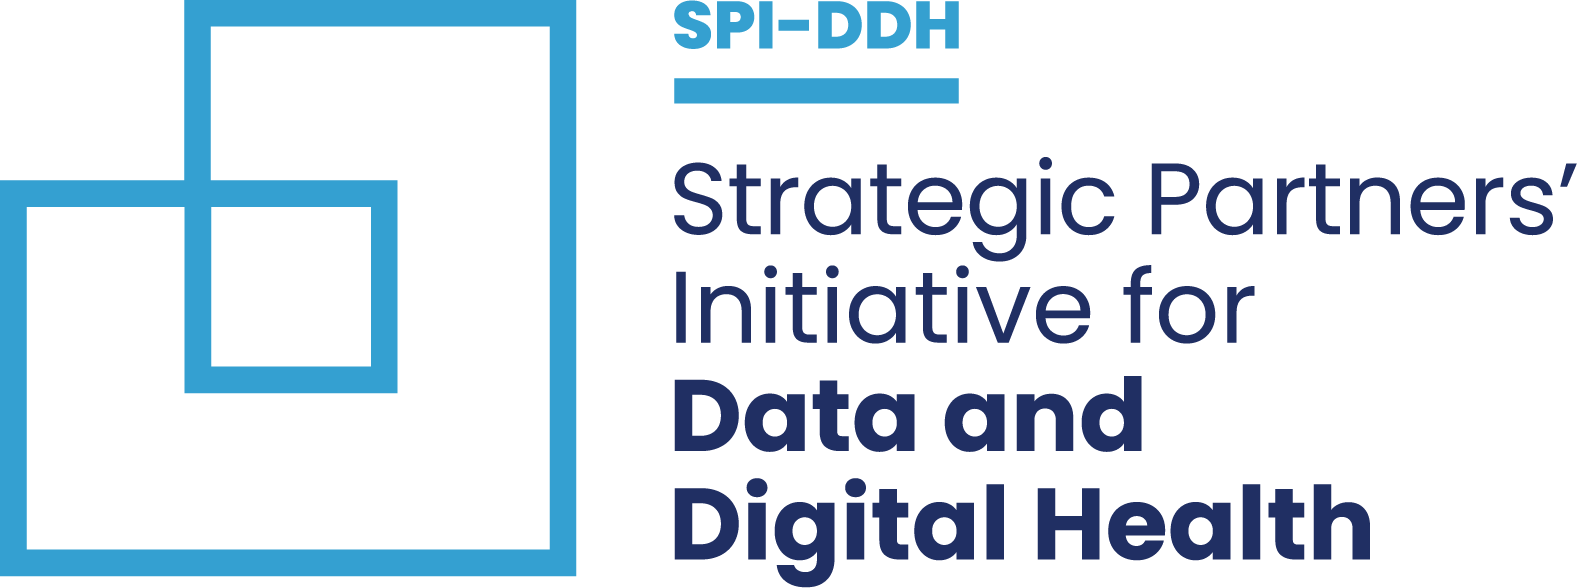 Strategic Partners' Initiative for Data and Digital Health Inaugural Meeting - Event by invitation only